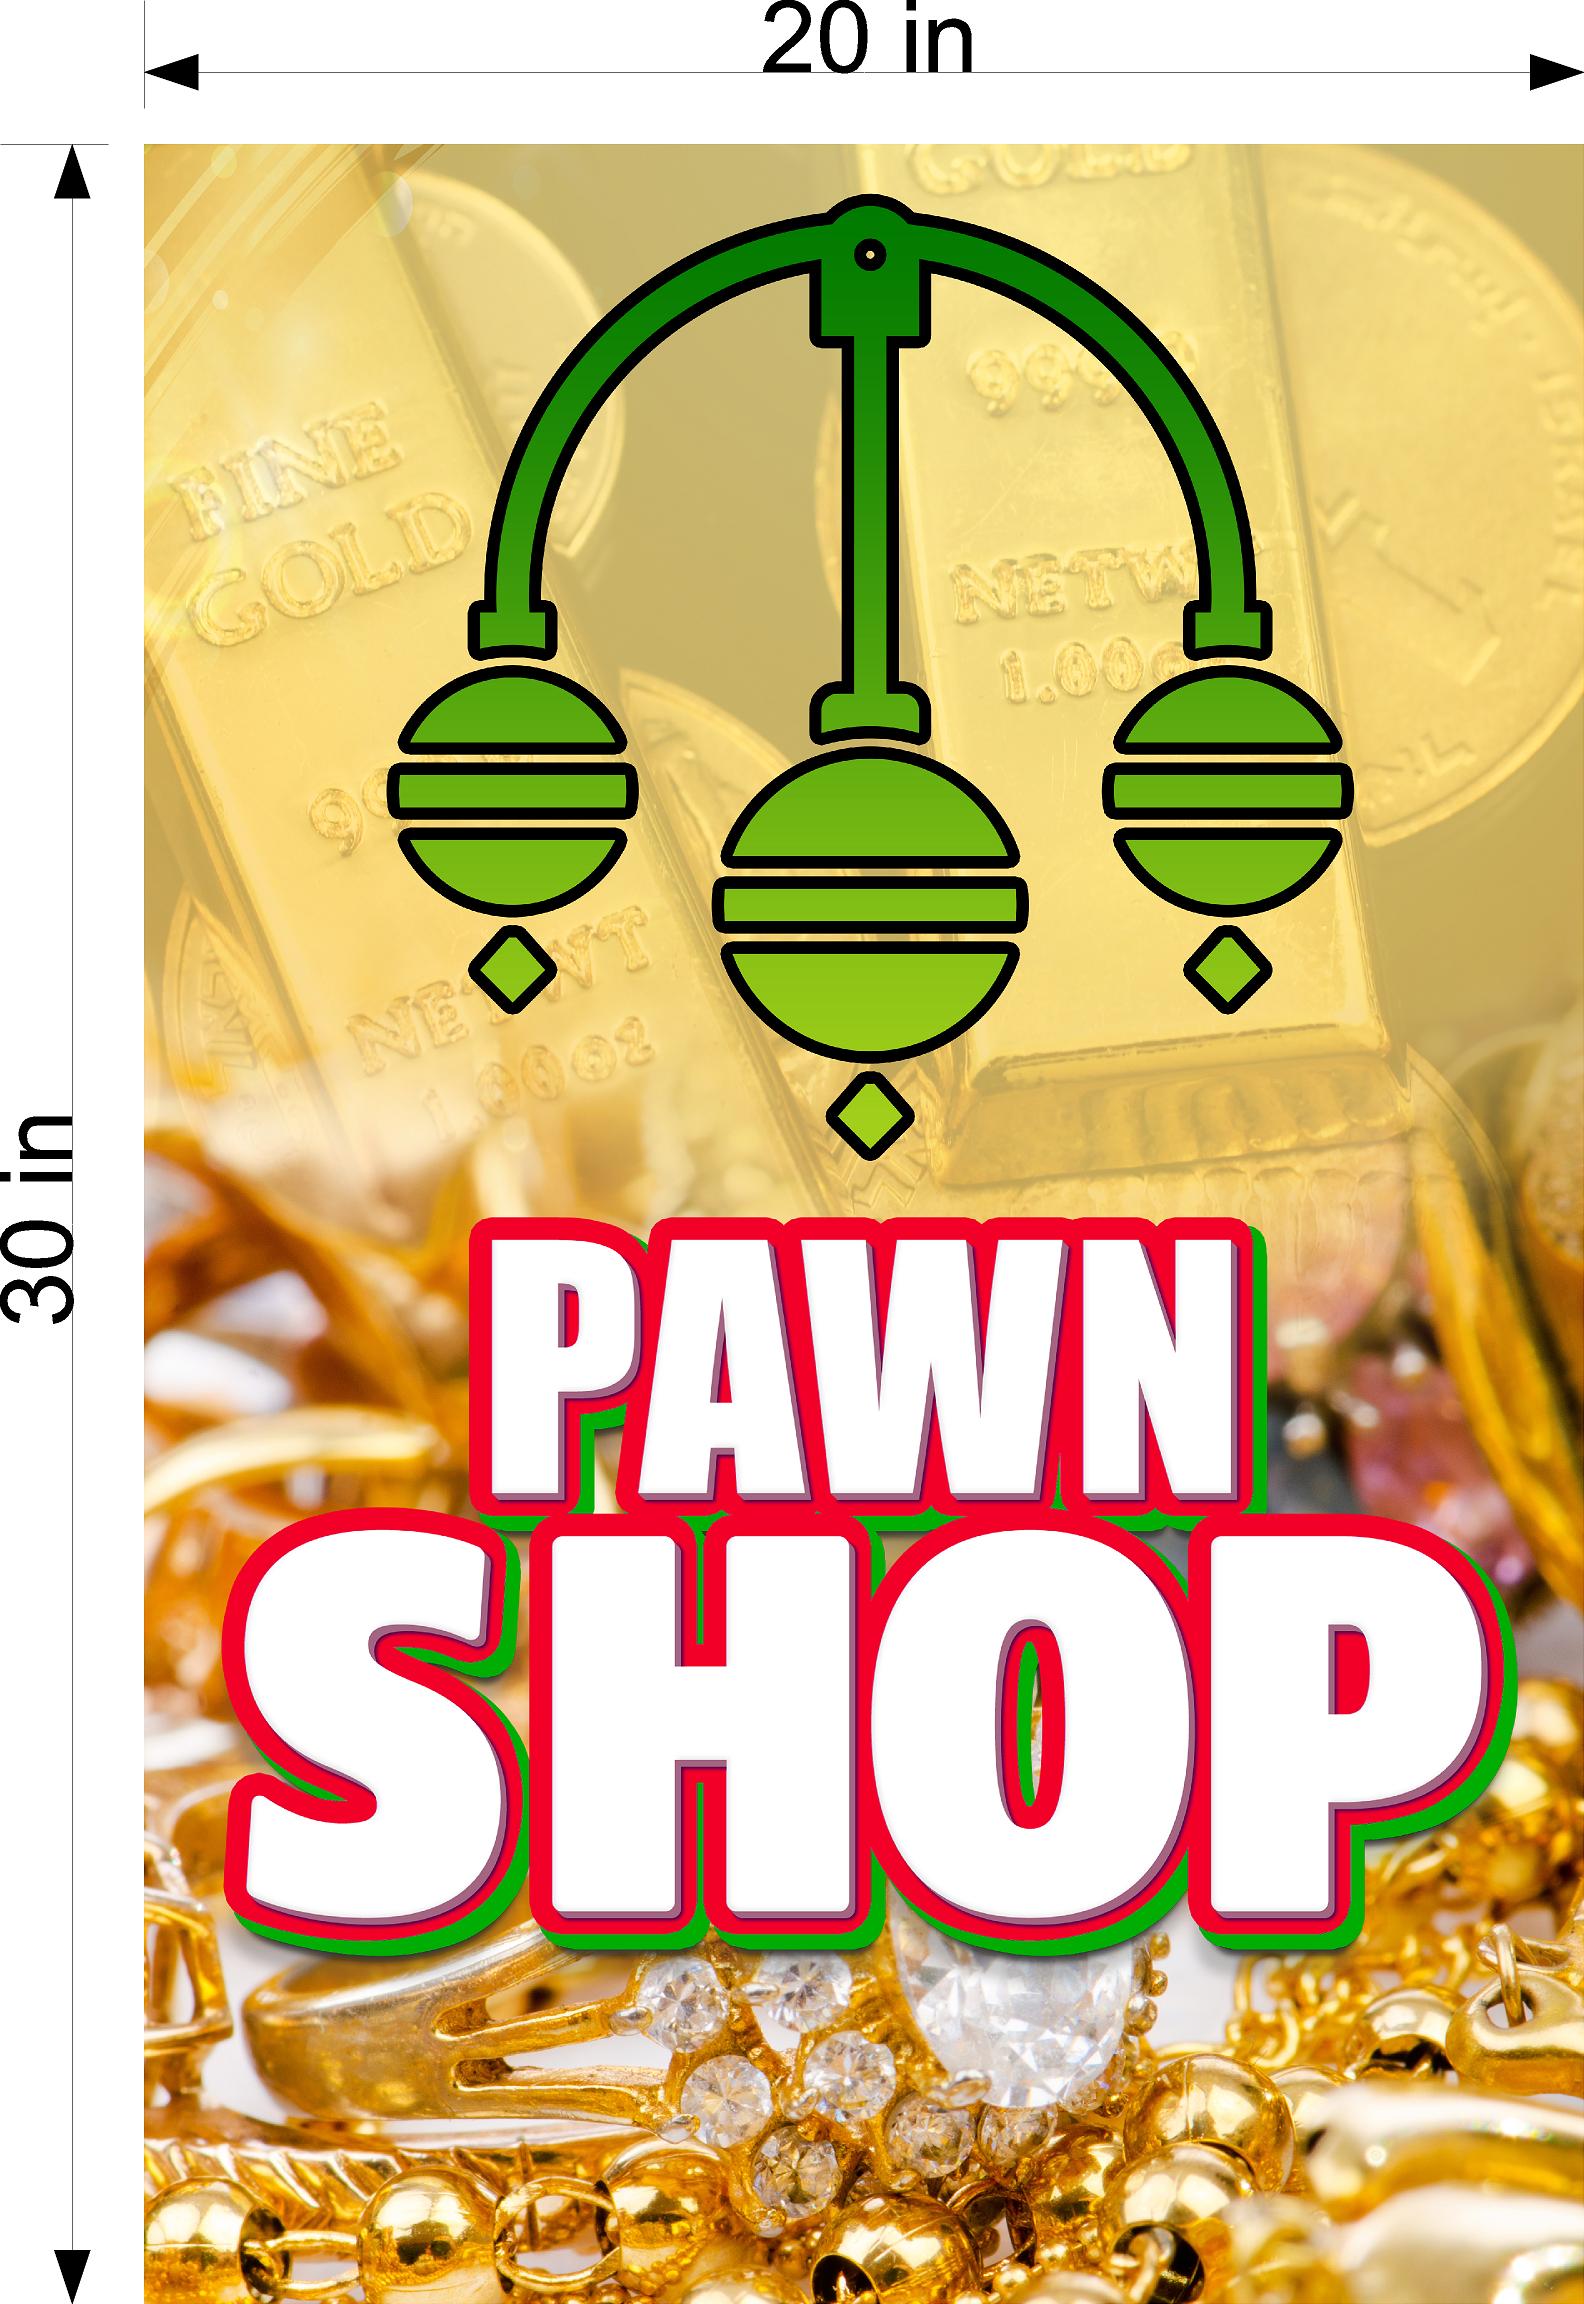 Pawn Shop 08 Photo-Realistic Paper Poster Premium Interior Inside Sign Buy Gold Silver Jewelry Wall Window Non-Laminated Vertical